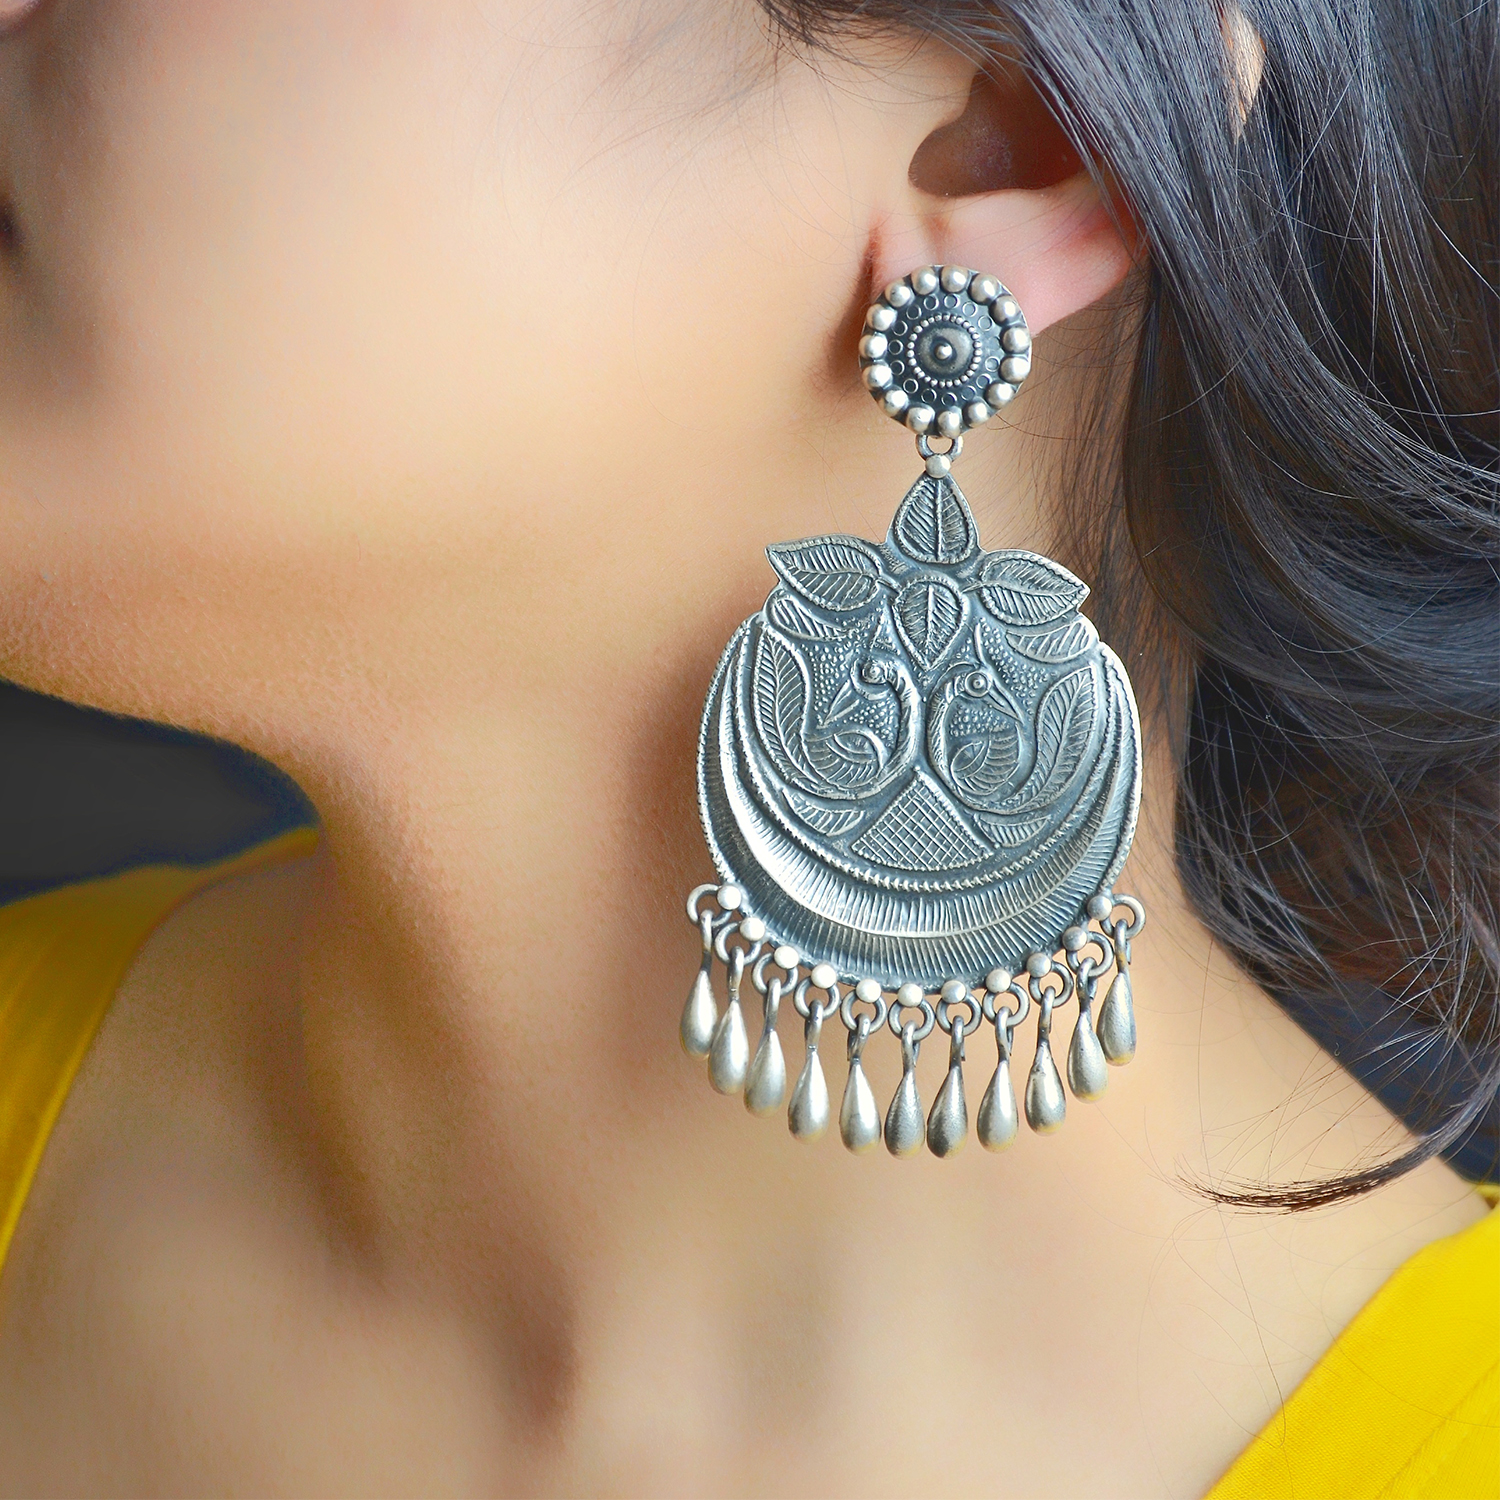 Indian Oxidized Silver Plated Handmade Jhumka Jhumki Earrings Dangel Drop  Jewelry for women and Girls, Afghani Earrings, Gifts for Mom/her